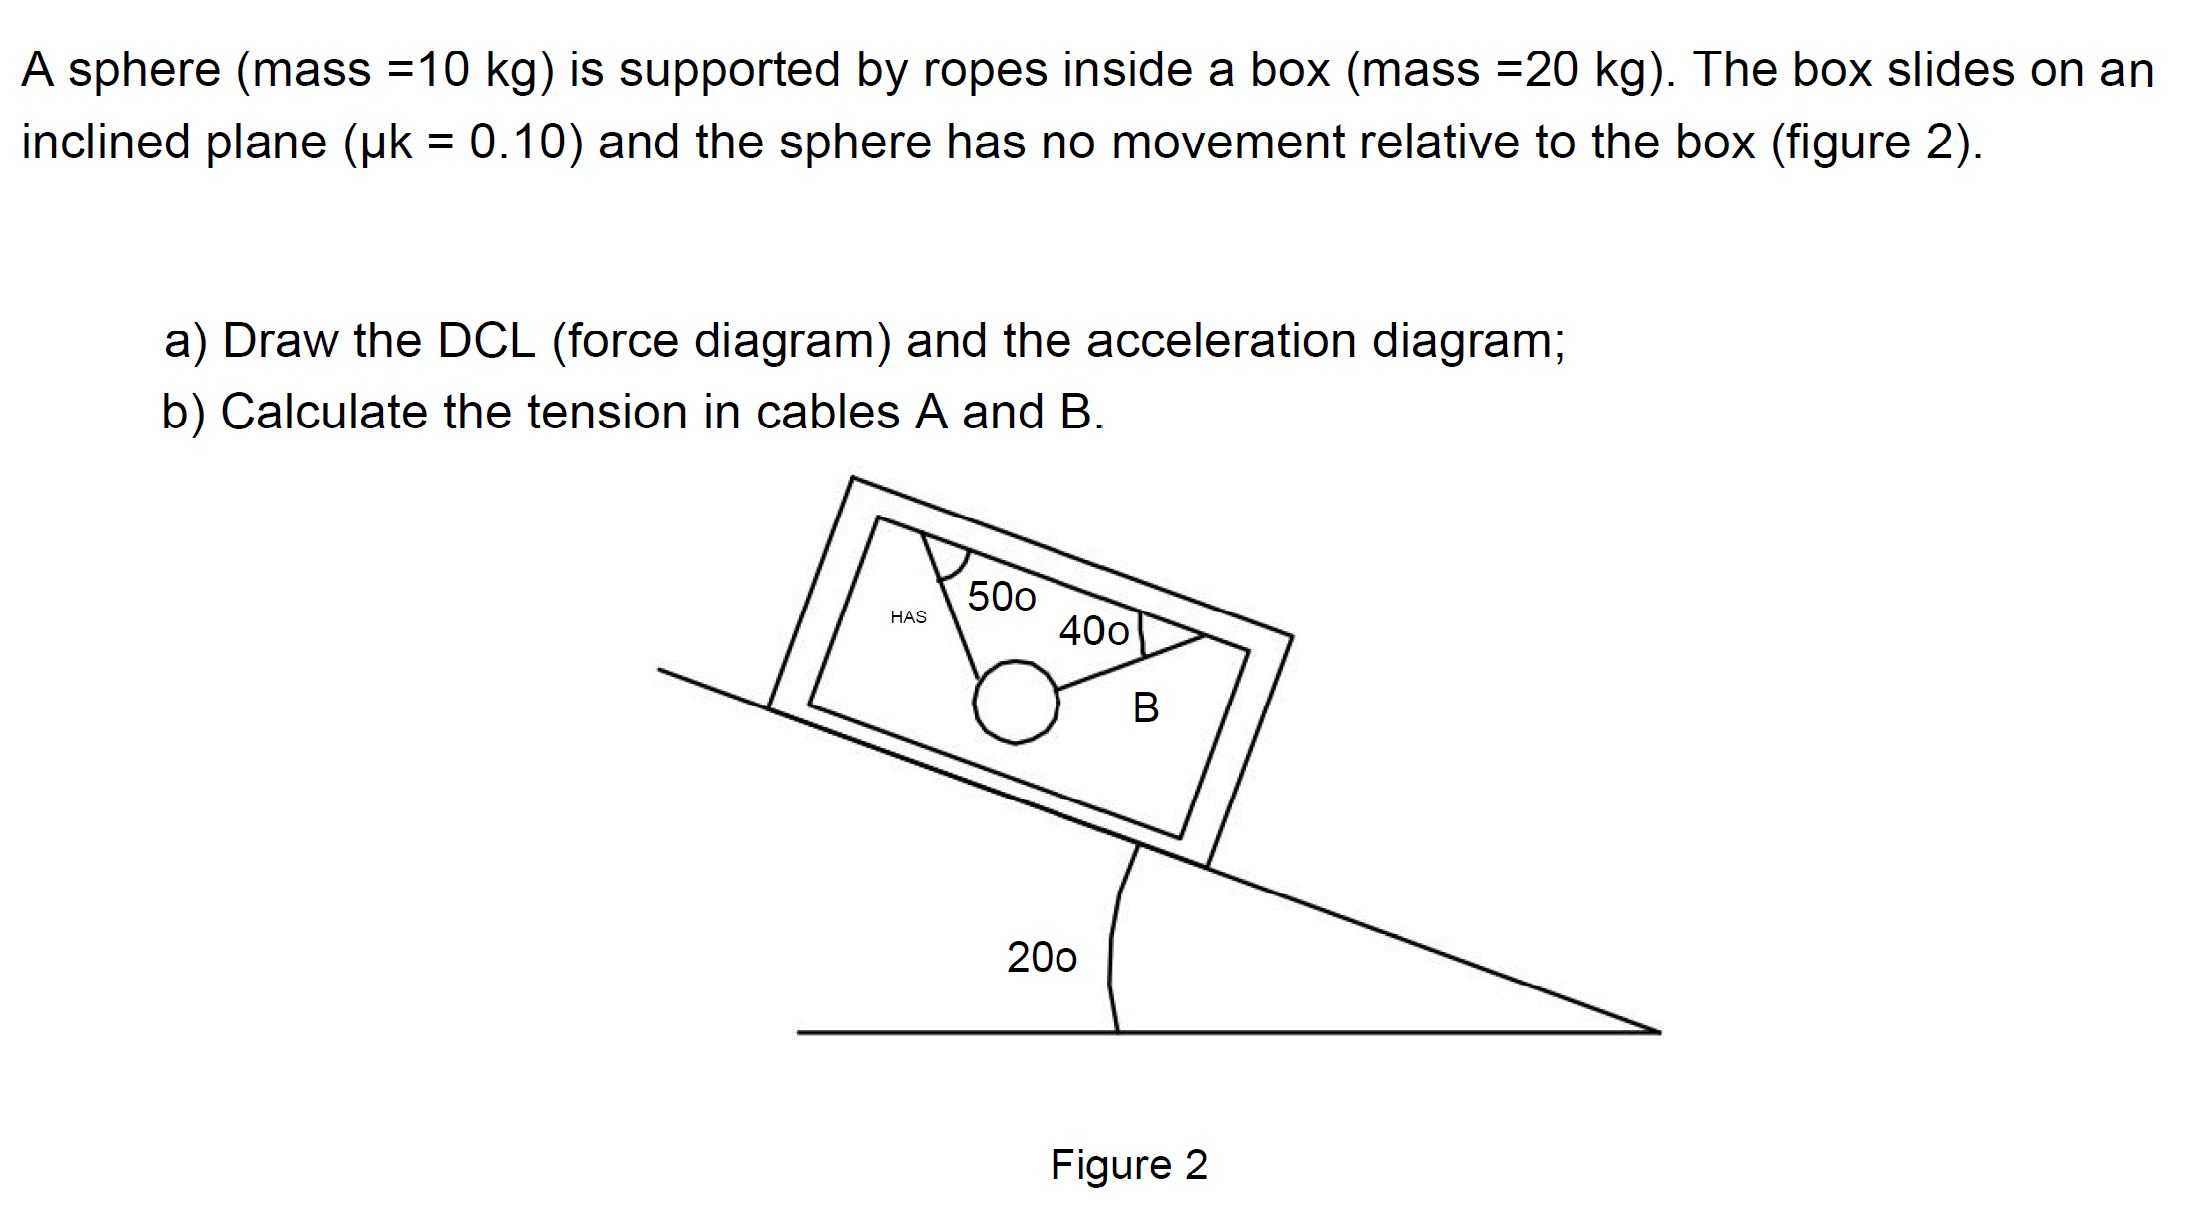 A sphere (mass =10 kg) is supported by ropes inside a box (mass =20 kg). The box slides on an inclined plane